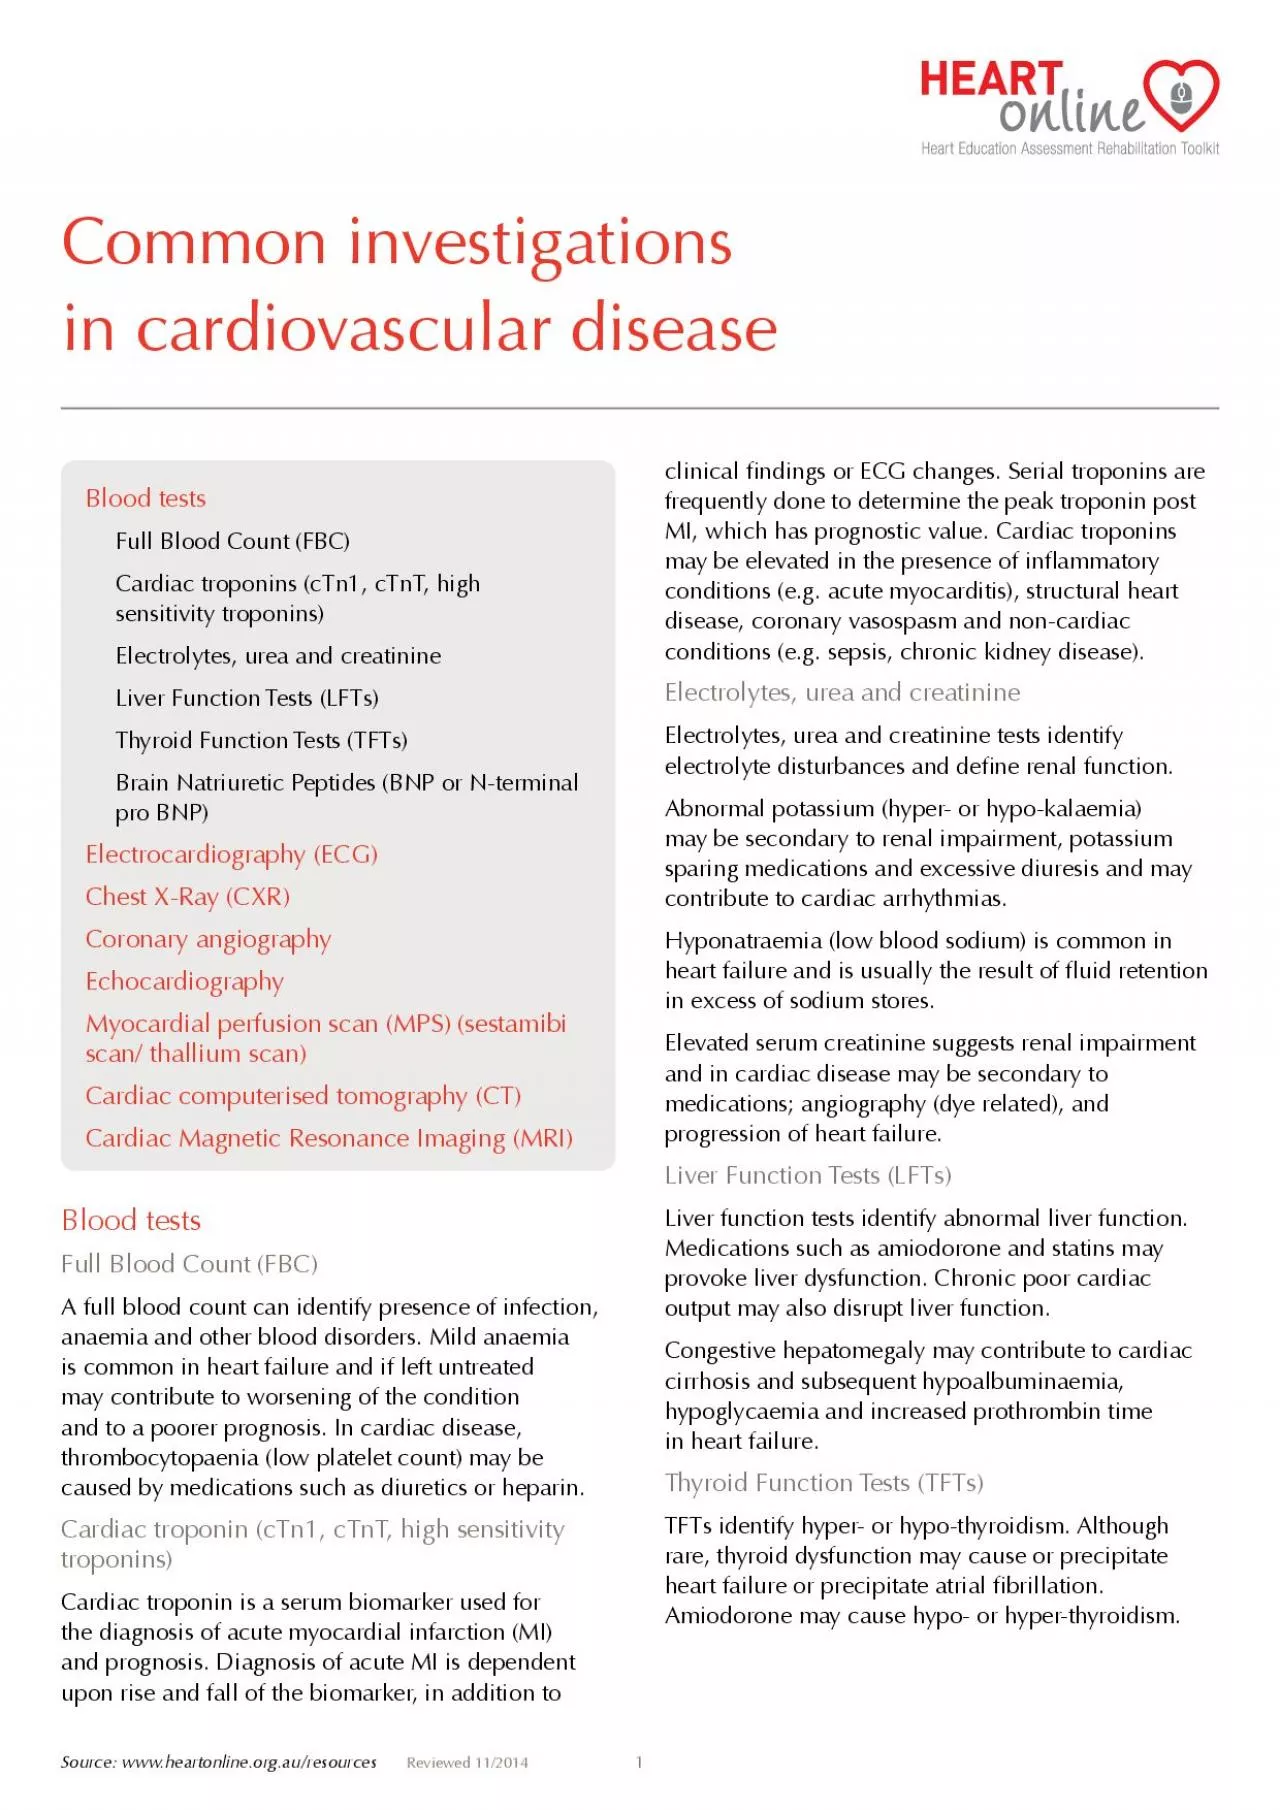 Common investigations in cardiovascular diseasemay contribute to worse